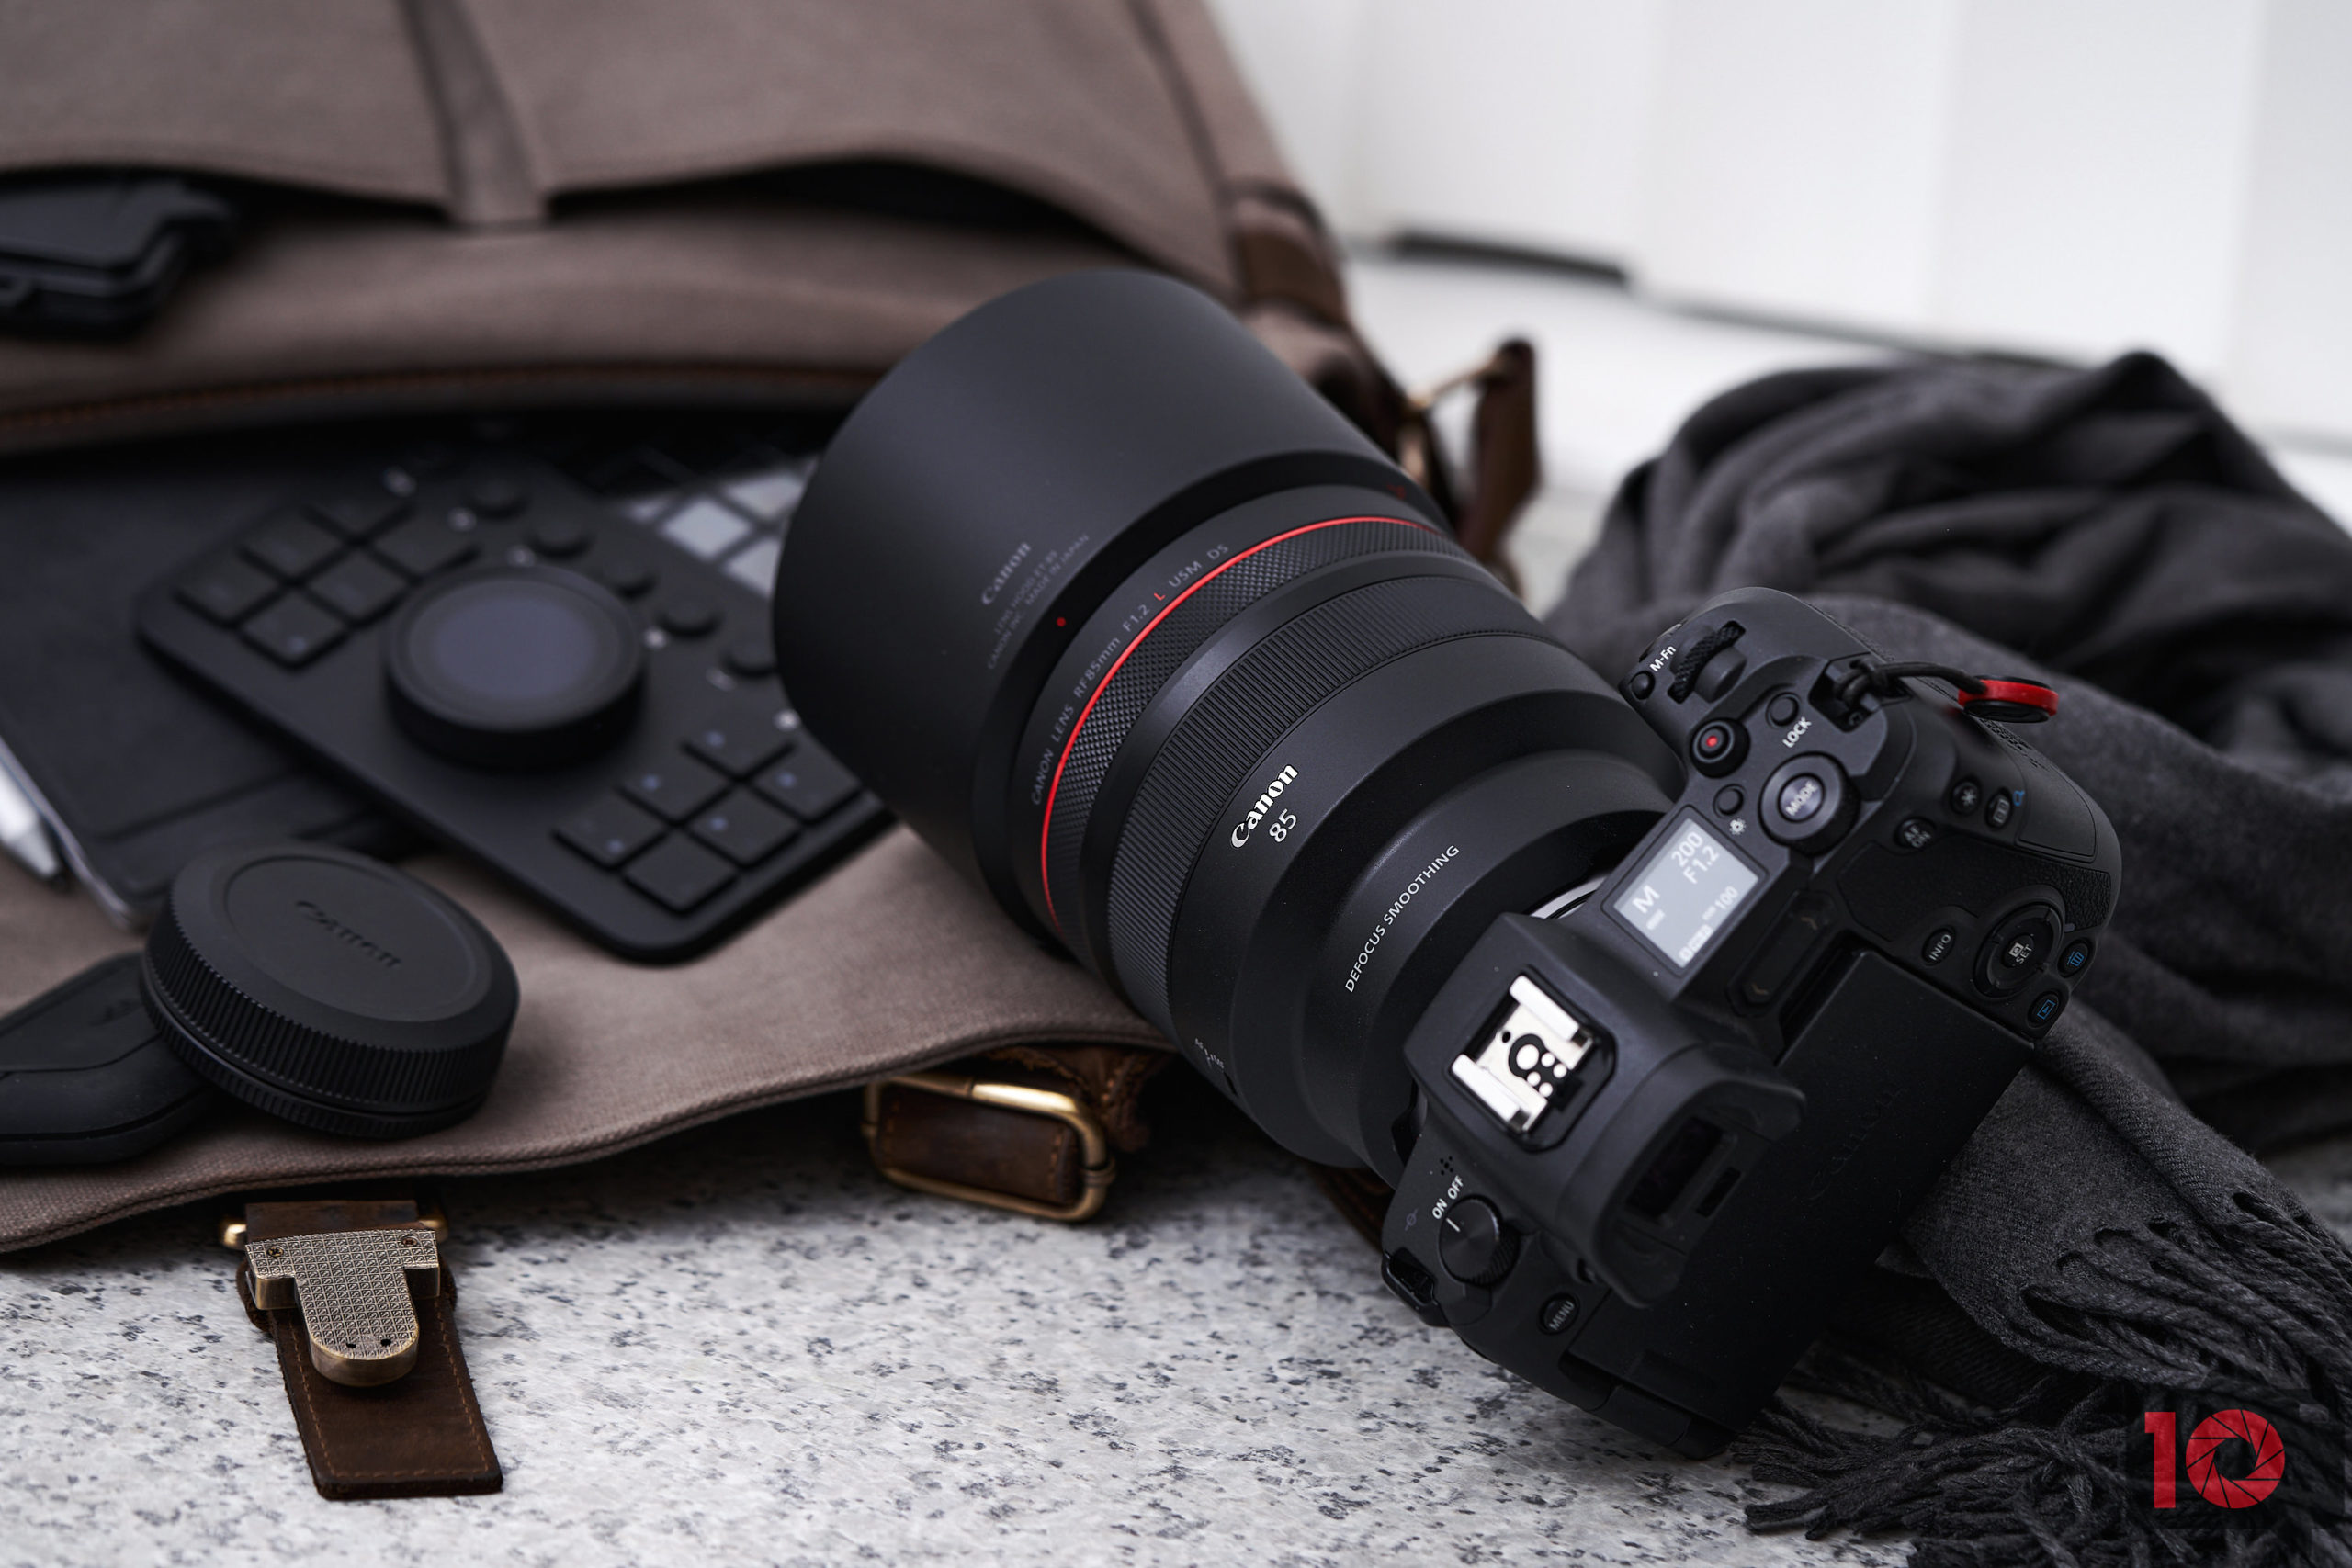 Canon Rf 85mm F1.2 L USM Ds 